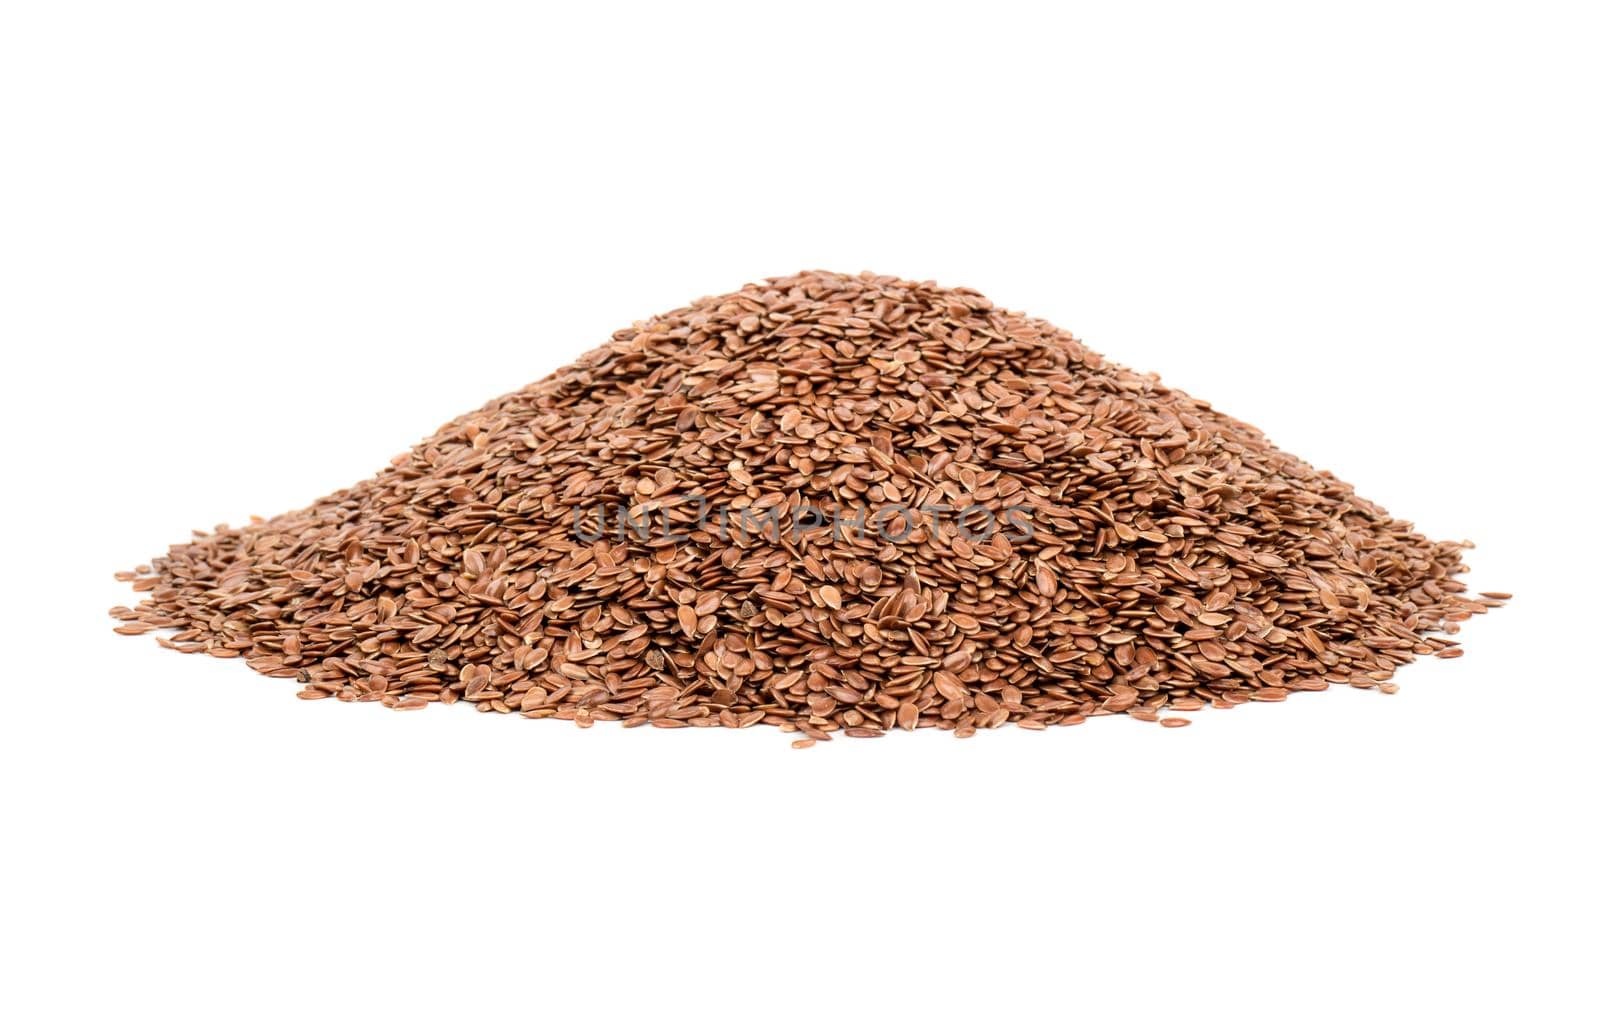 Bunch of raw flax seeds isolated on white background